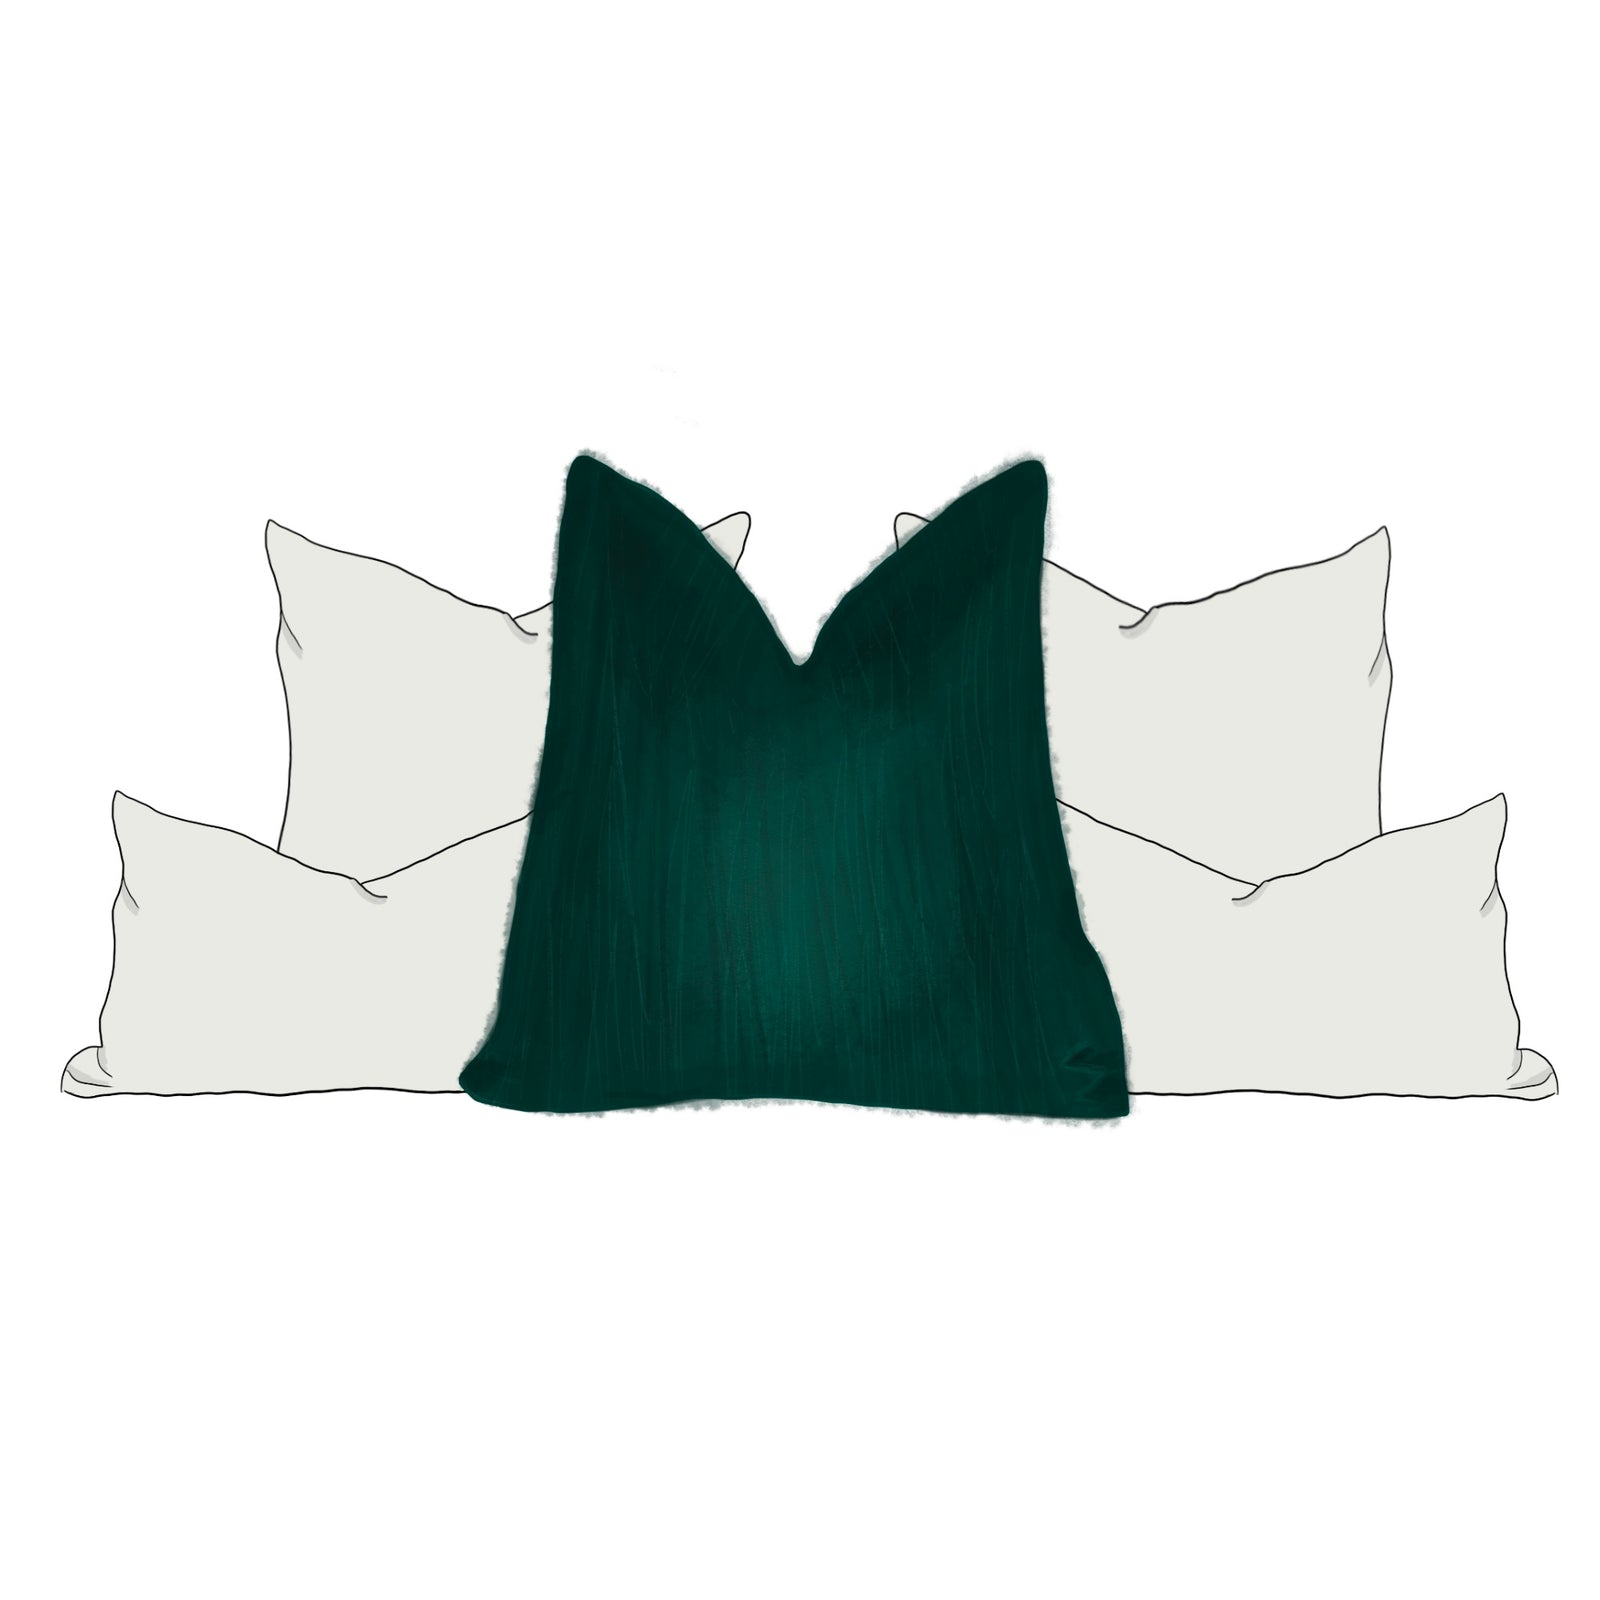 Tips for Cleaning Pillows and Pillowcases - Embassy Cleaners